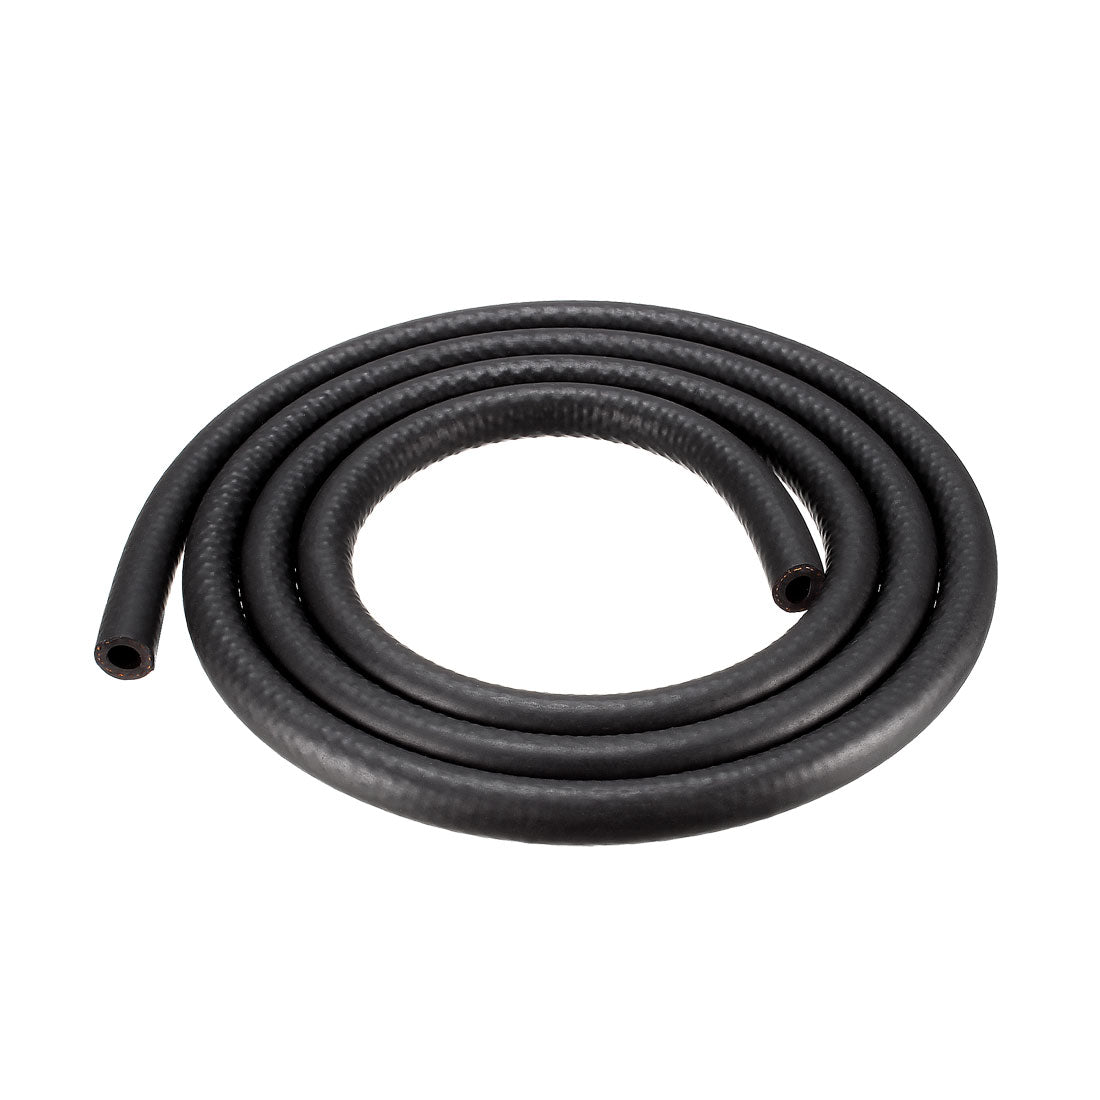 uxcell Uxcell Fuel Line Fuel Hose Rubber  8mm I.D.  1.8M/5.9FT  Diesel Petrol Hose Engine Pipe Tubing